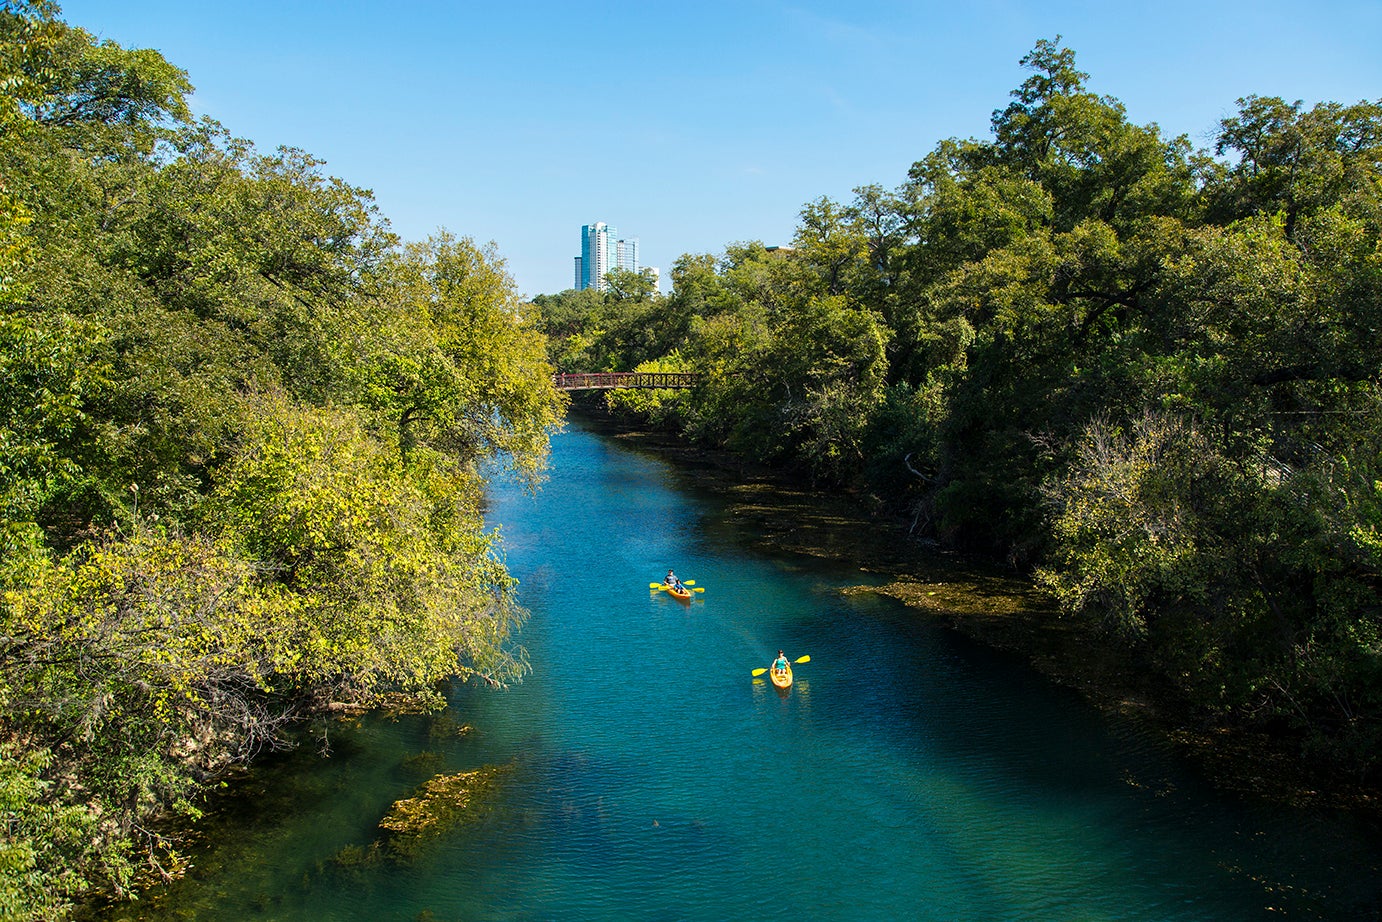 Immerse yourself in nature, kayaking on Lady Bird Lake